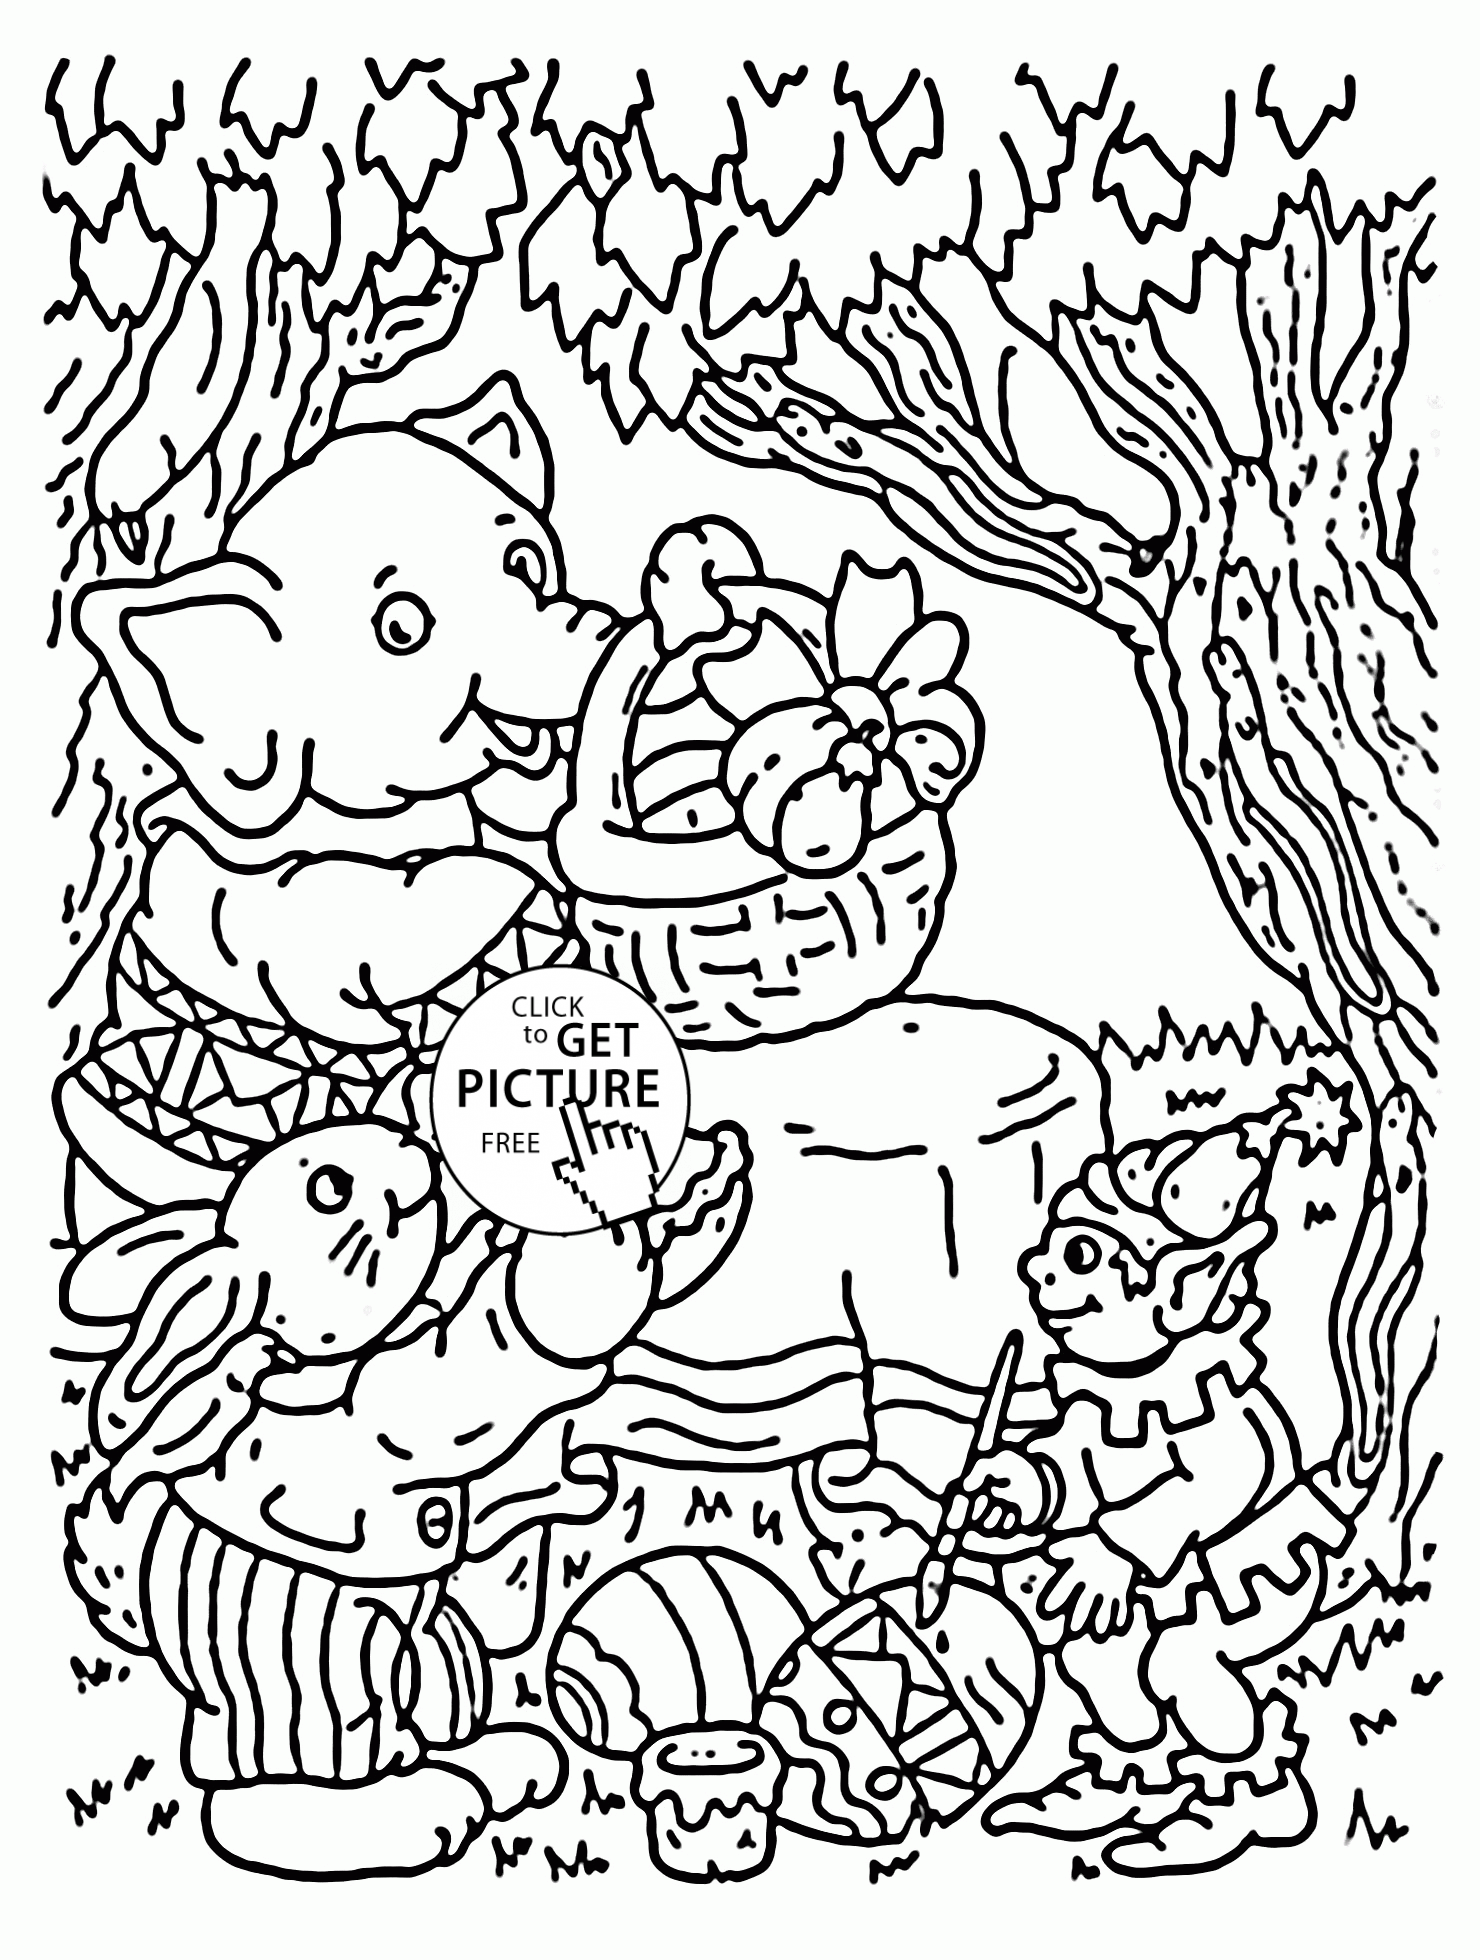 Easter in the Forest coloring page for kids, coloring pages